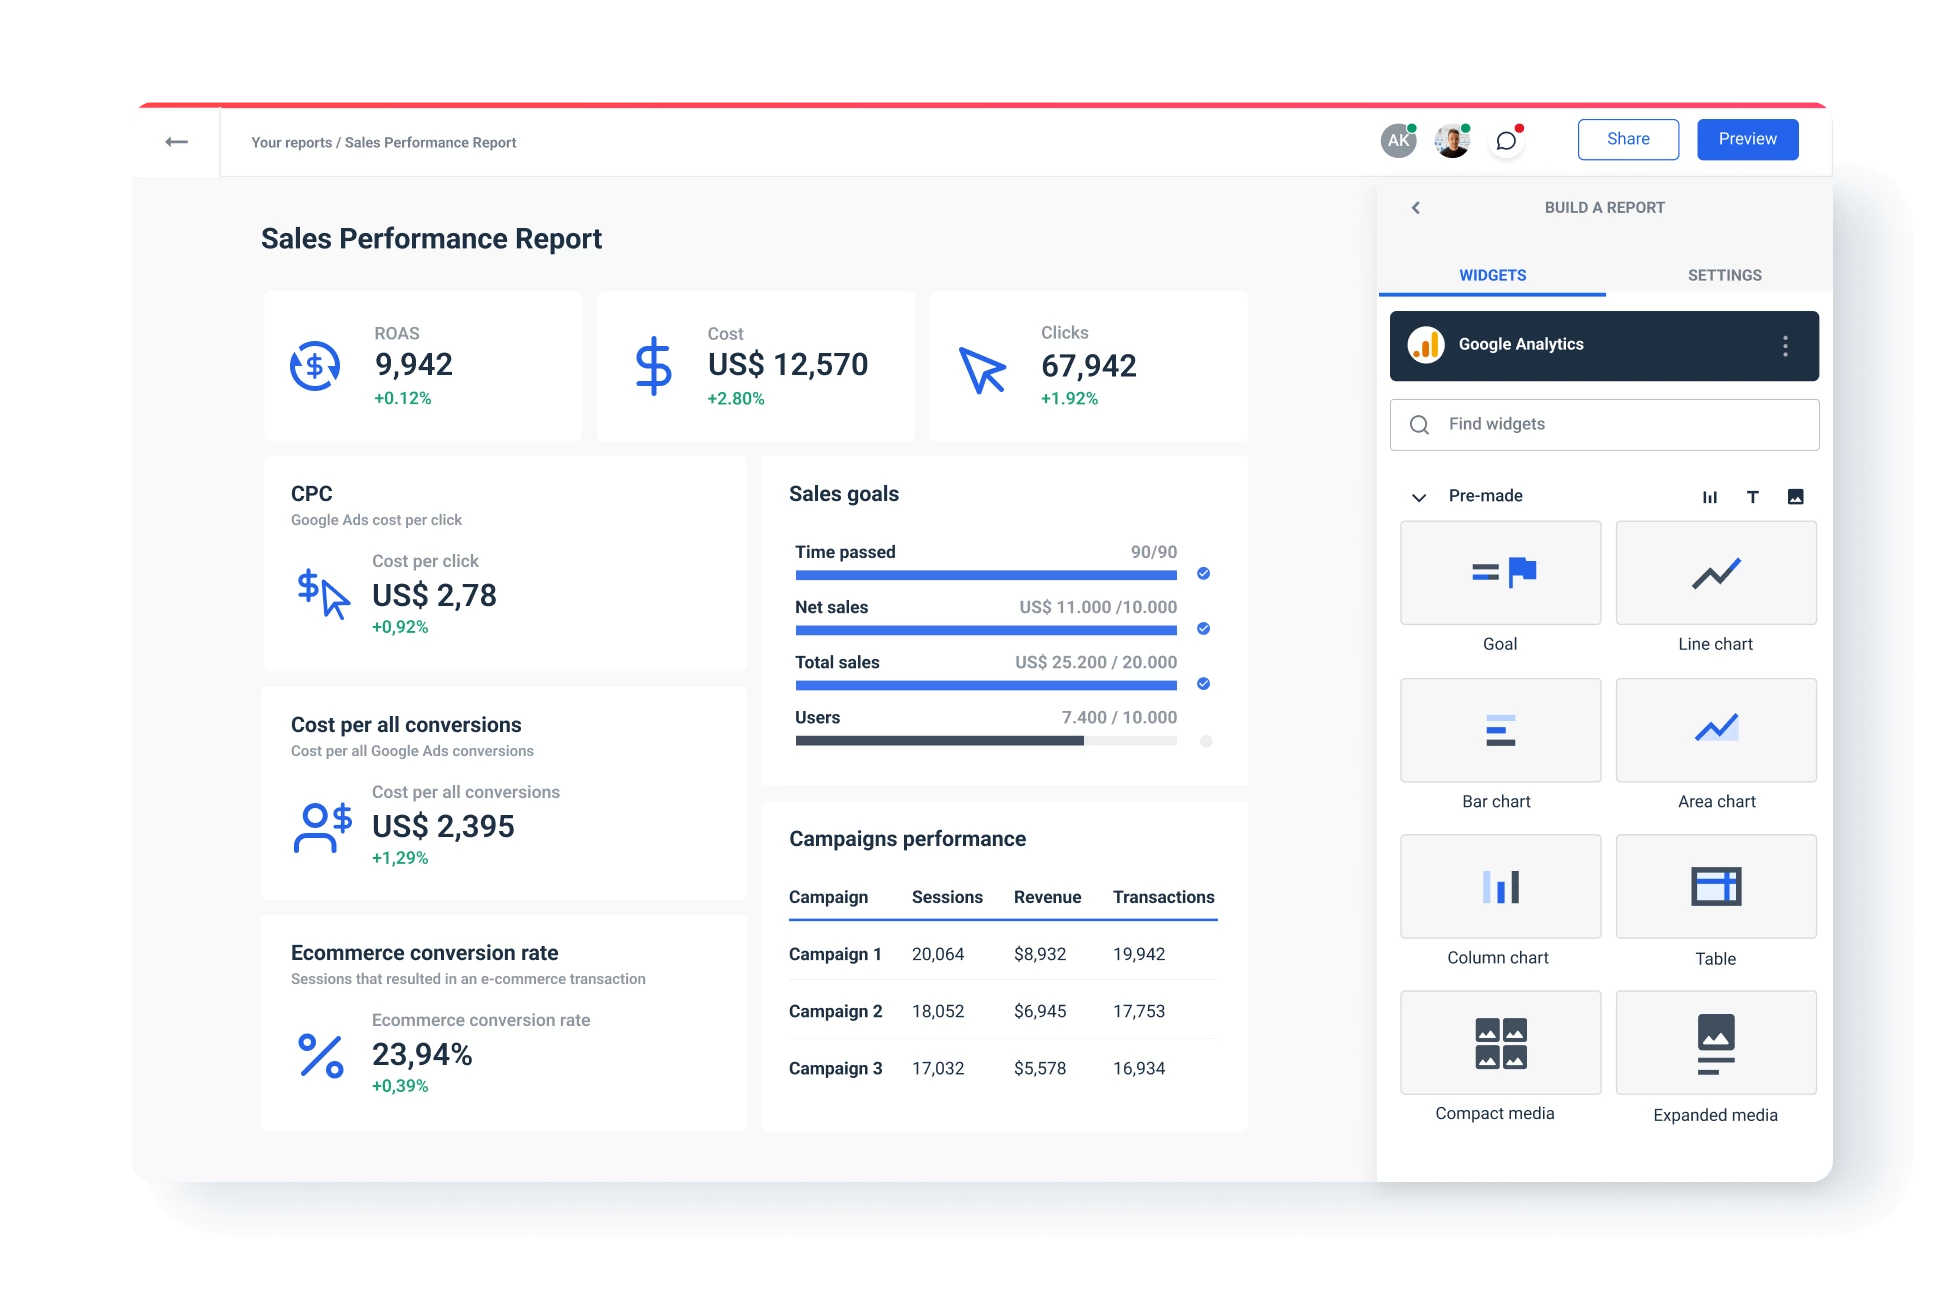 Sales performance report with all metrics